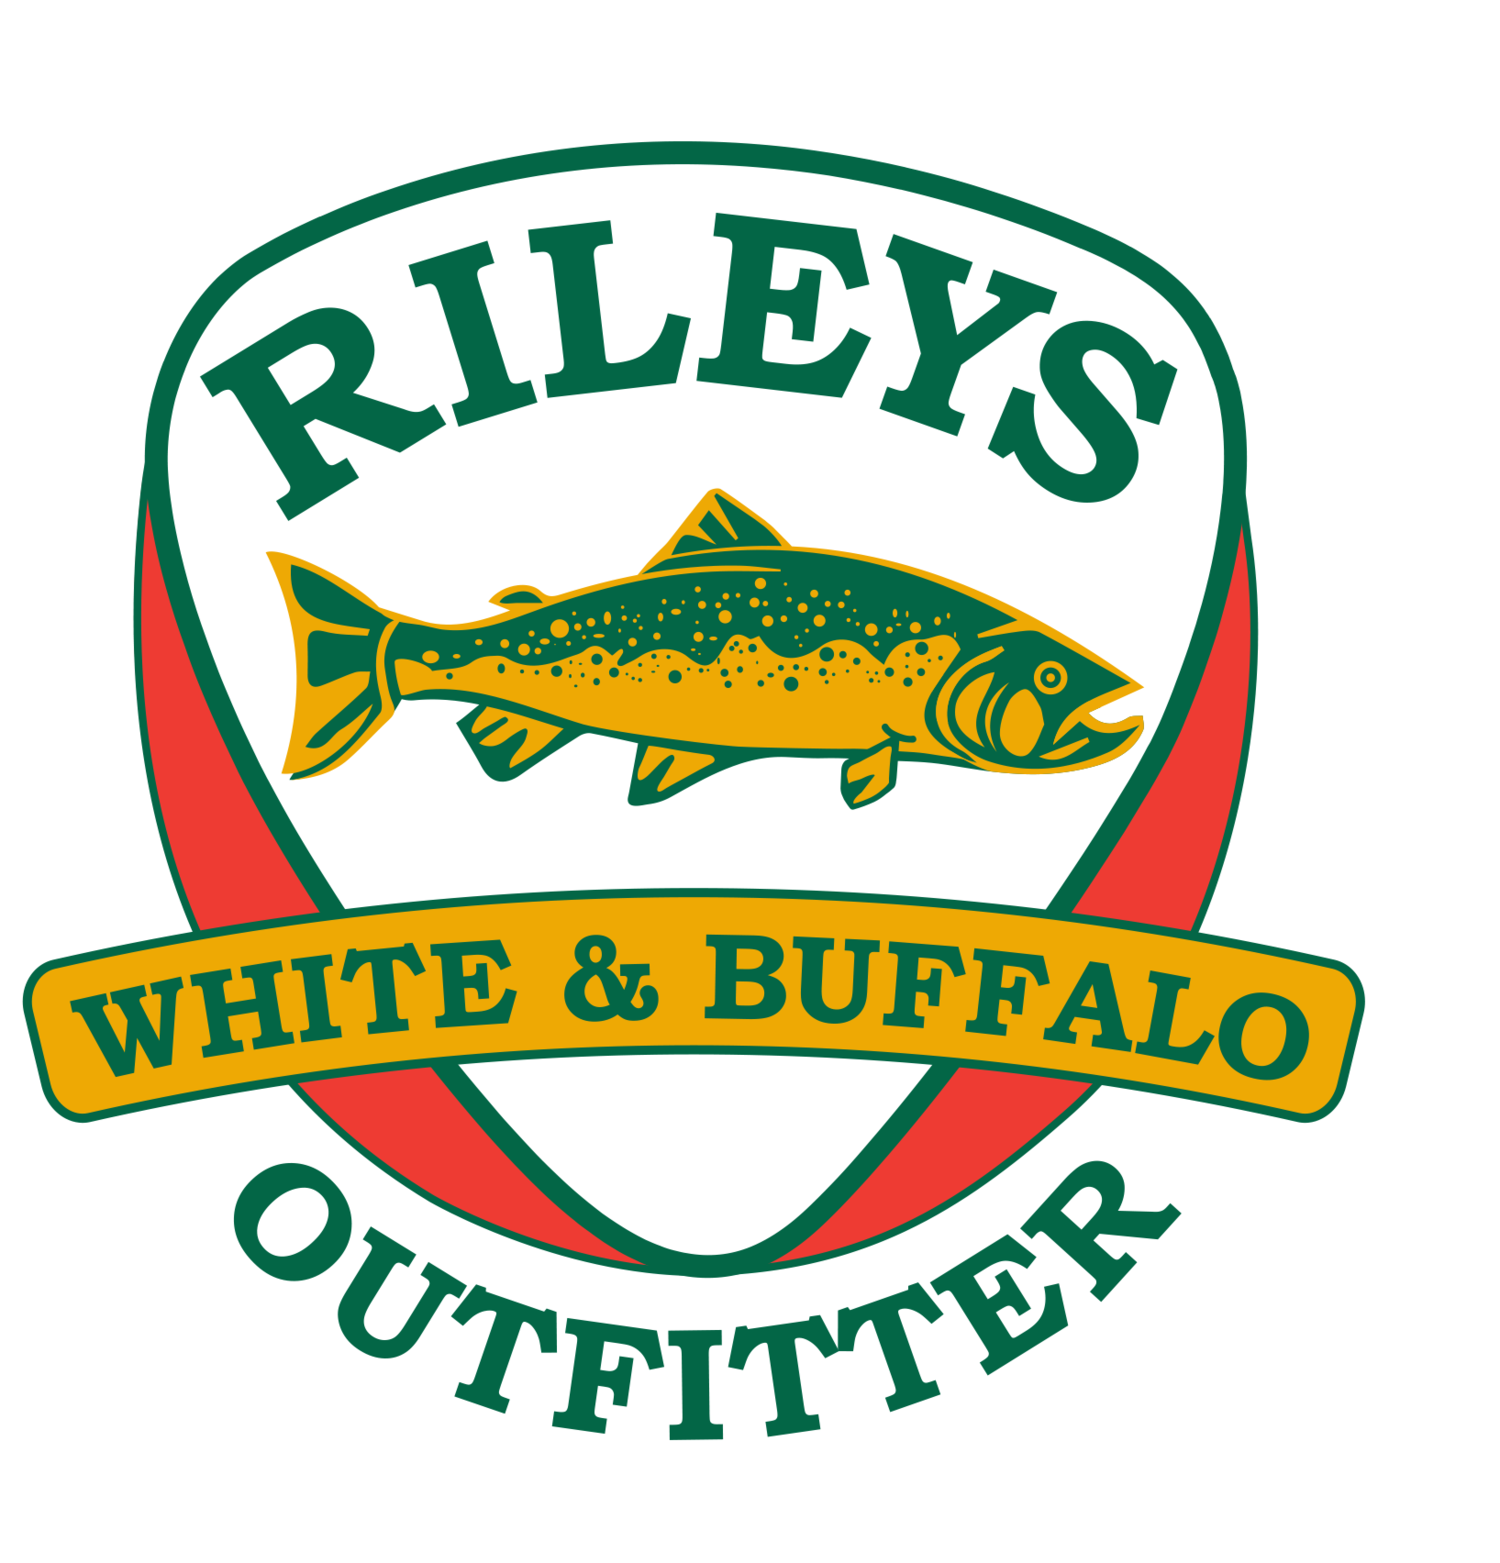 Rileys Outfitter